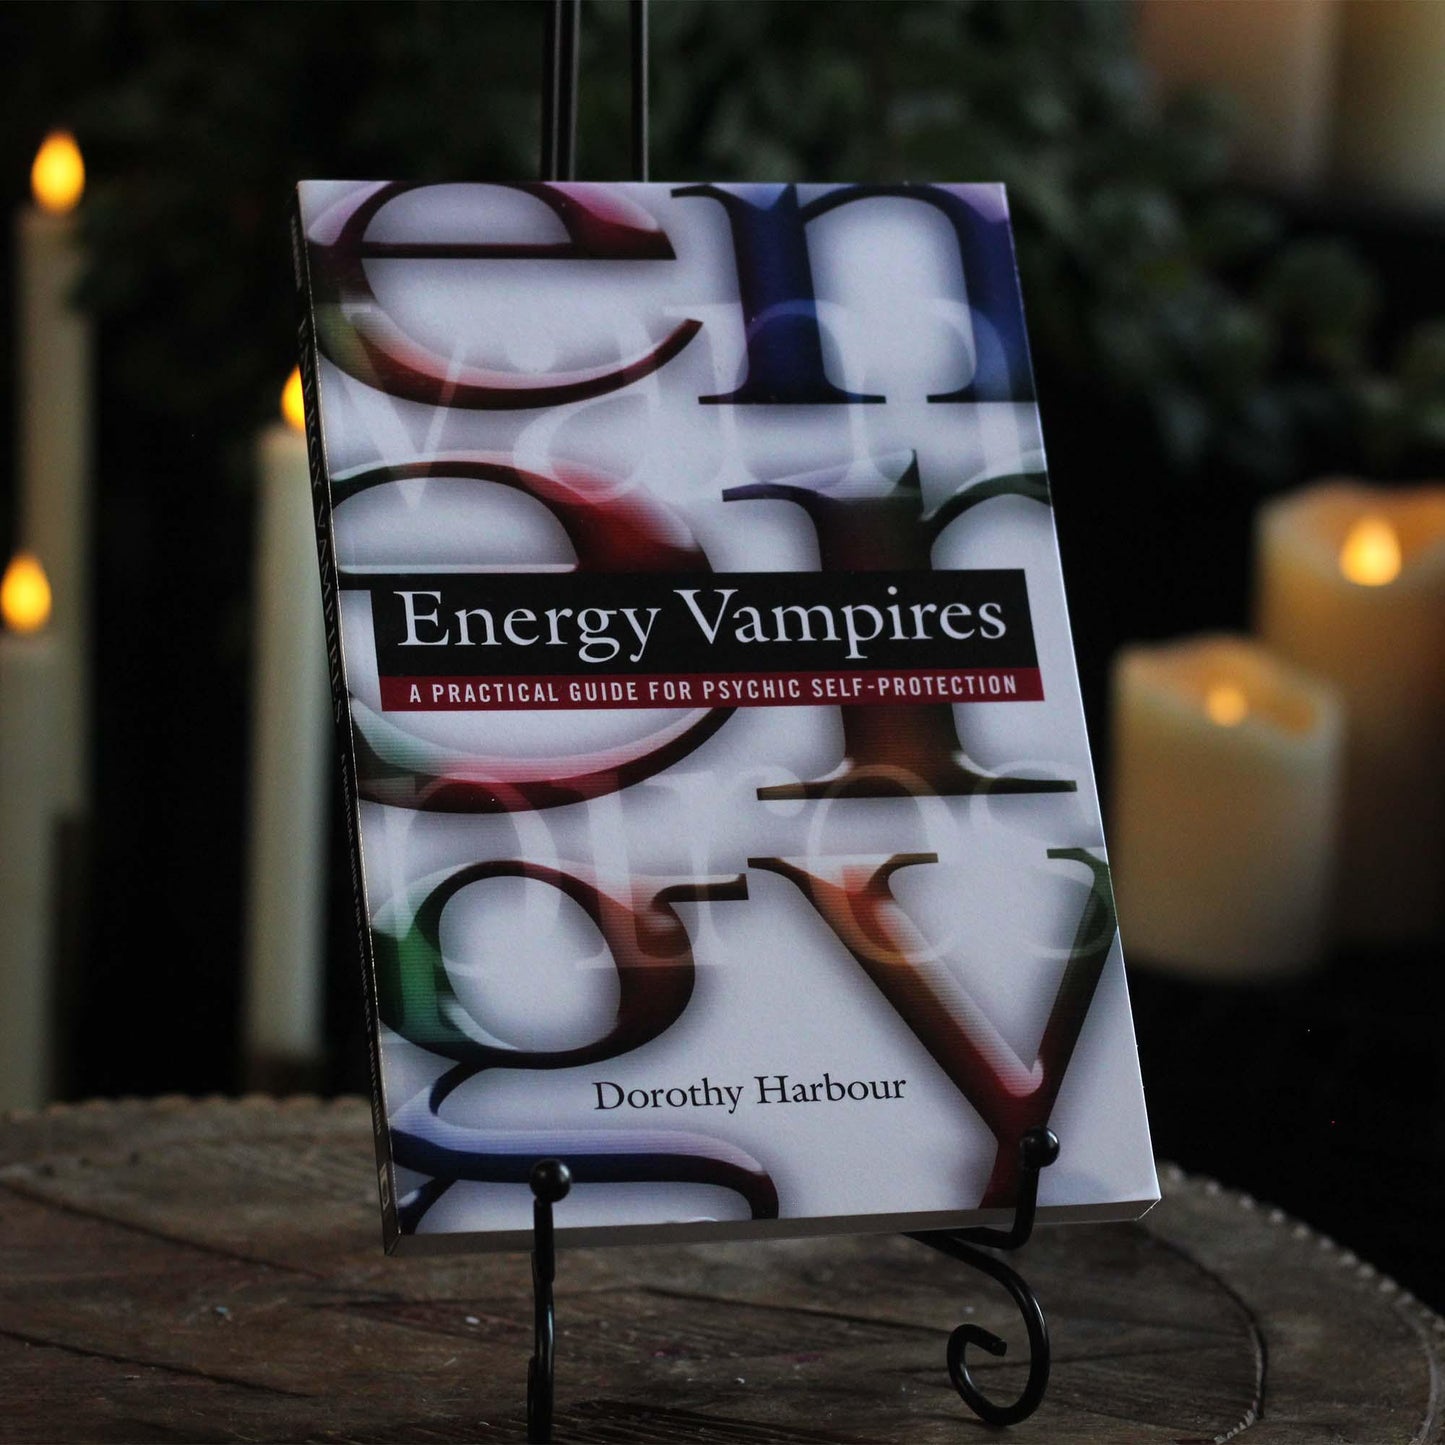 ENERGY VAMPIRES: A GUIDE FOR PSYCHIC SELF-PROTECTION